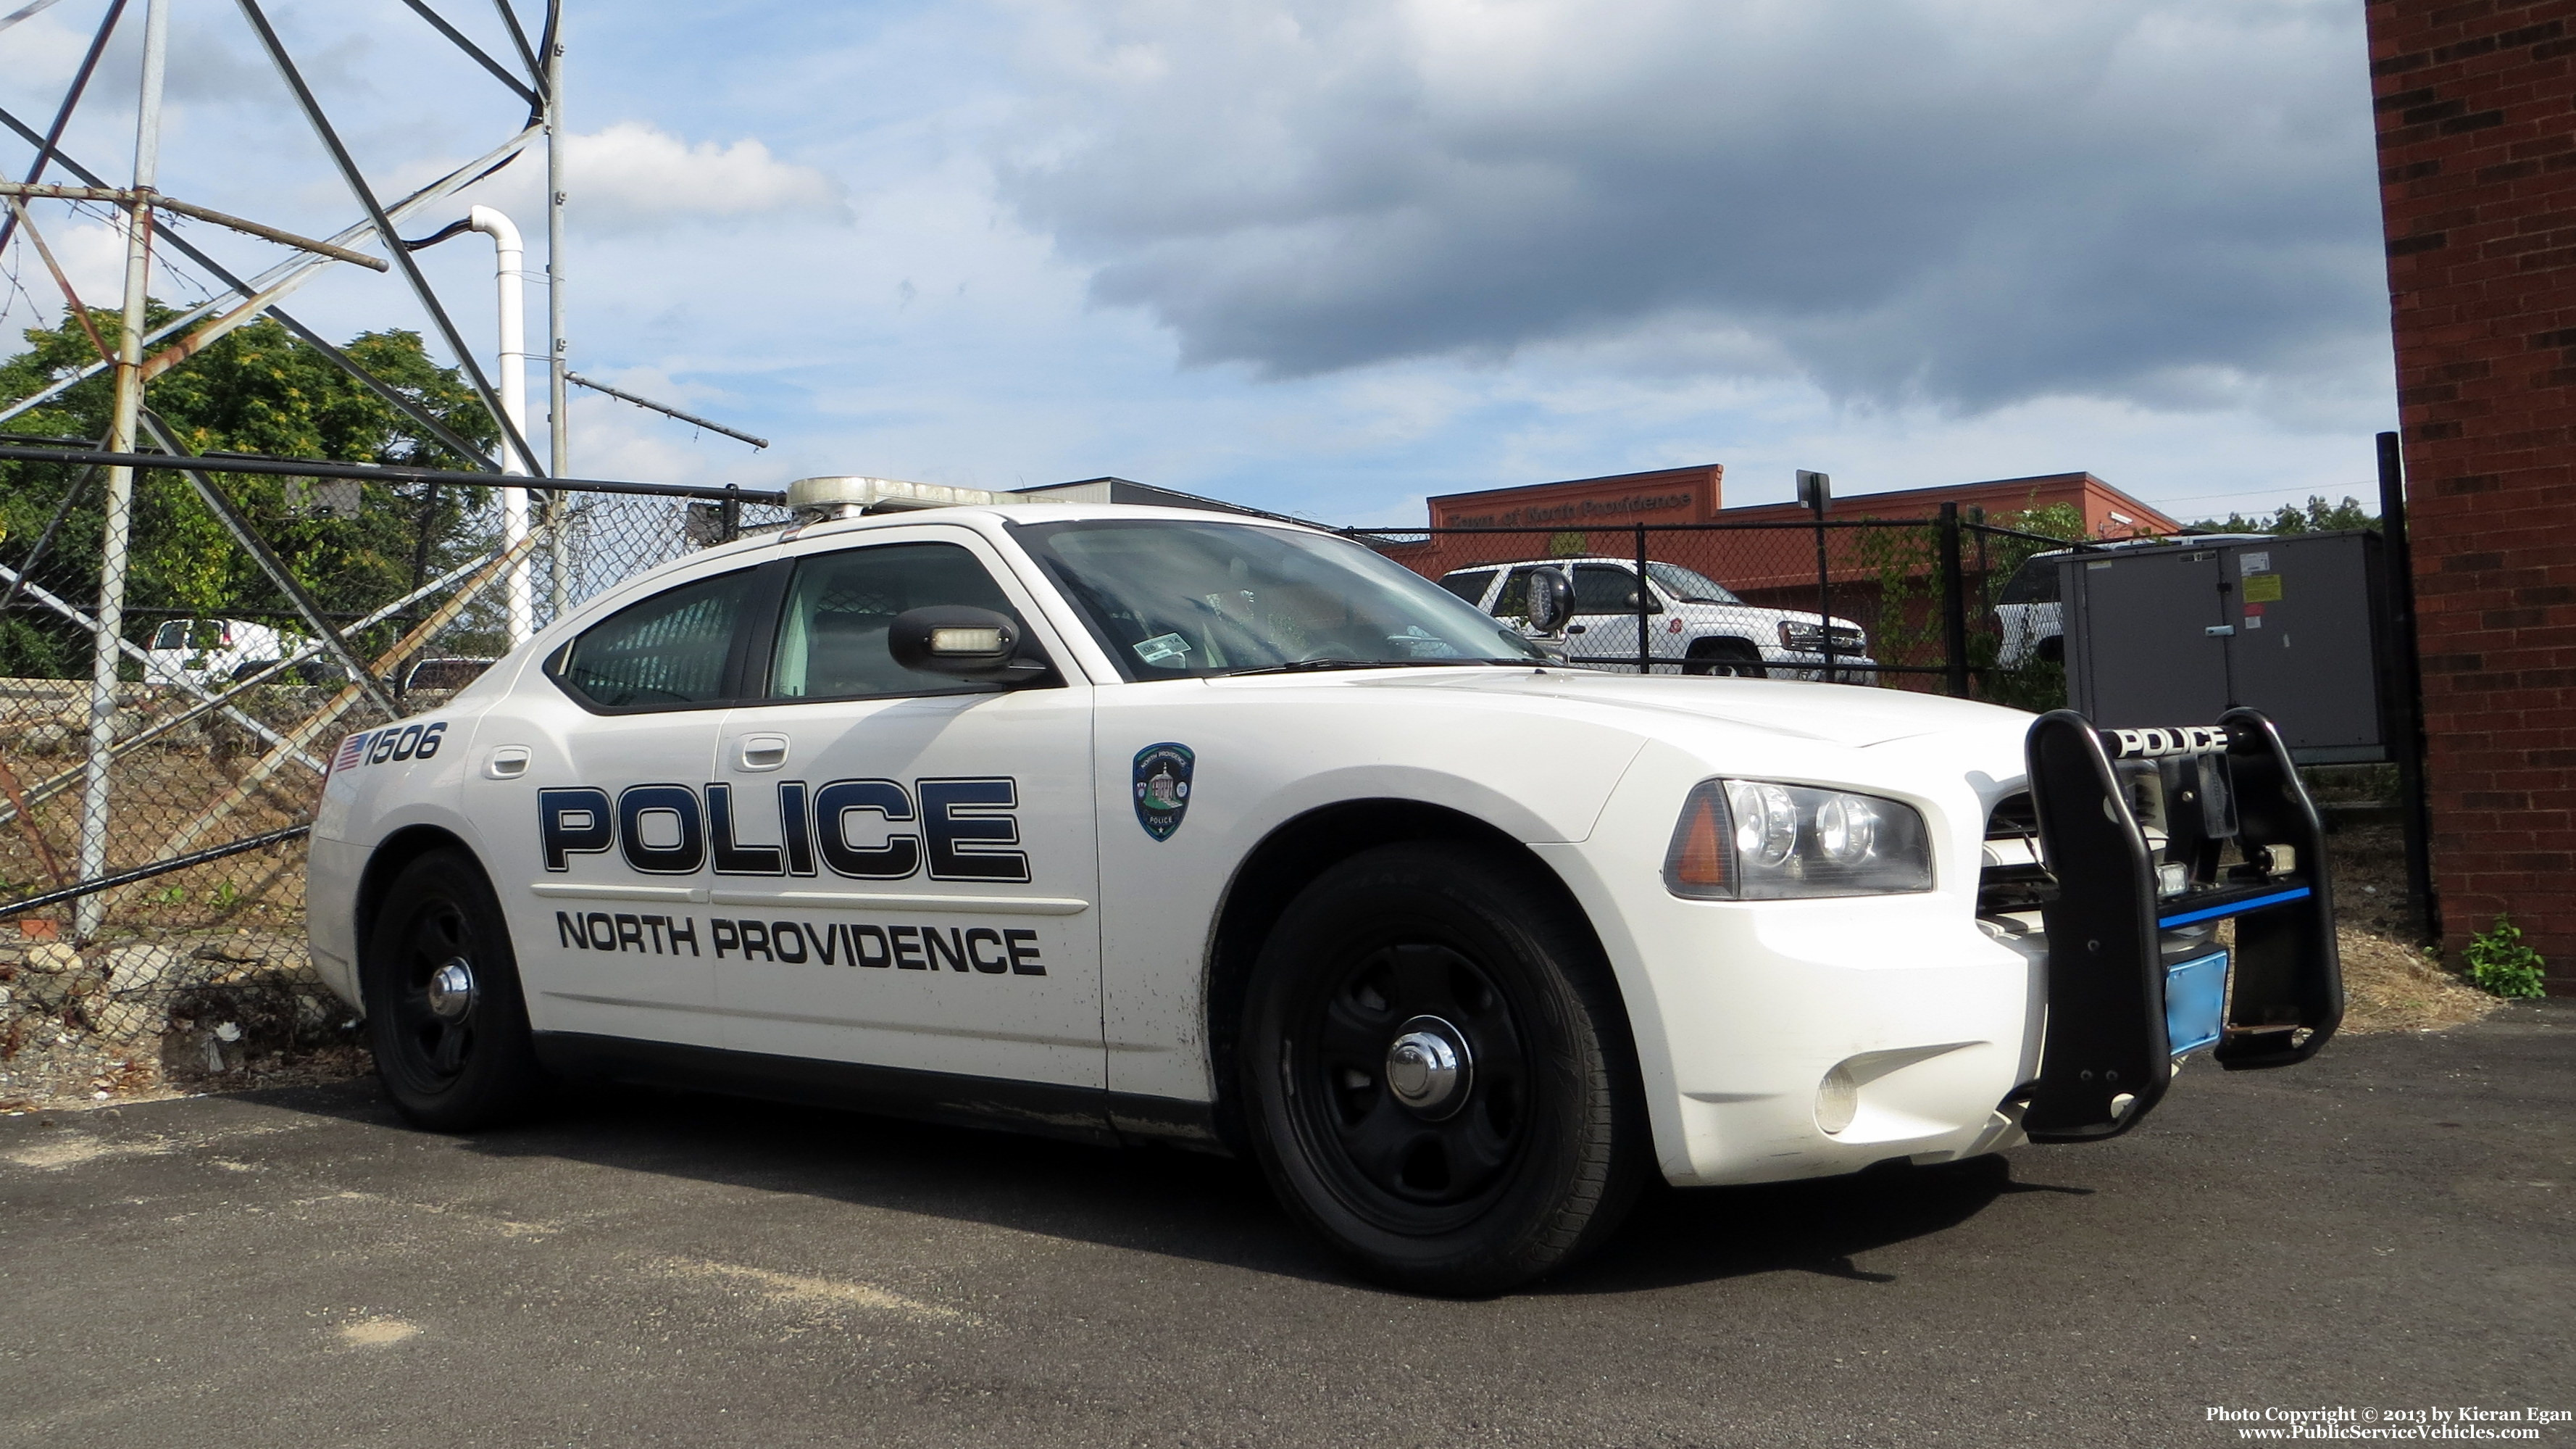 A photo  of North Providence Police
            Cruiser 1506, a 2009 Dodge Charger             taken by Kieran Egan